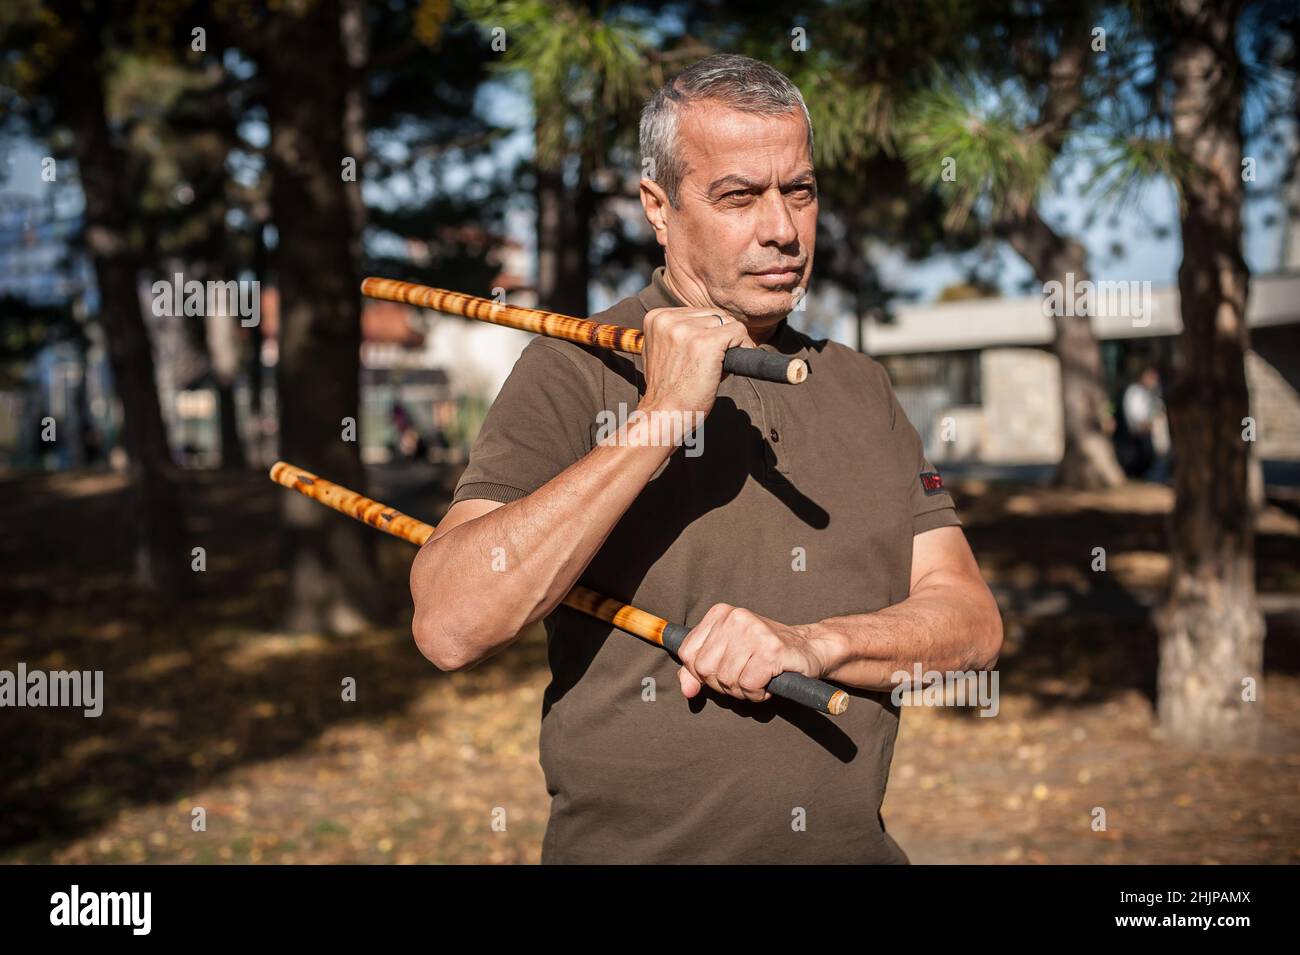 Filipino Martial Arts Instructor Demonstrates Stick Fighting Techniques  Stock Photo - Image of astig, outdoor: 109278684